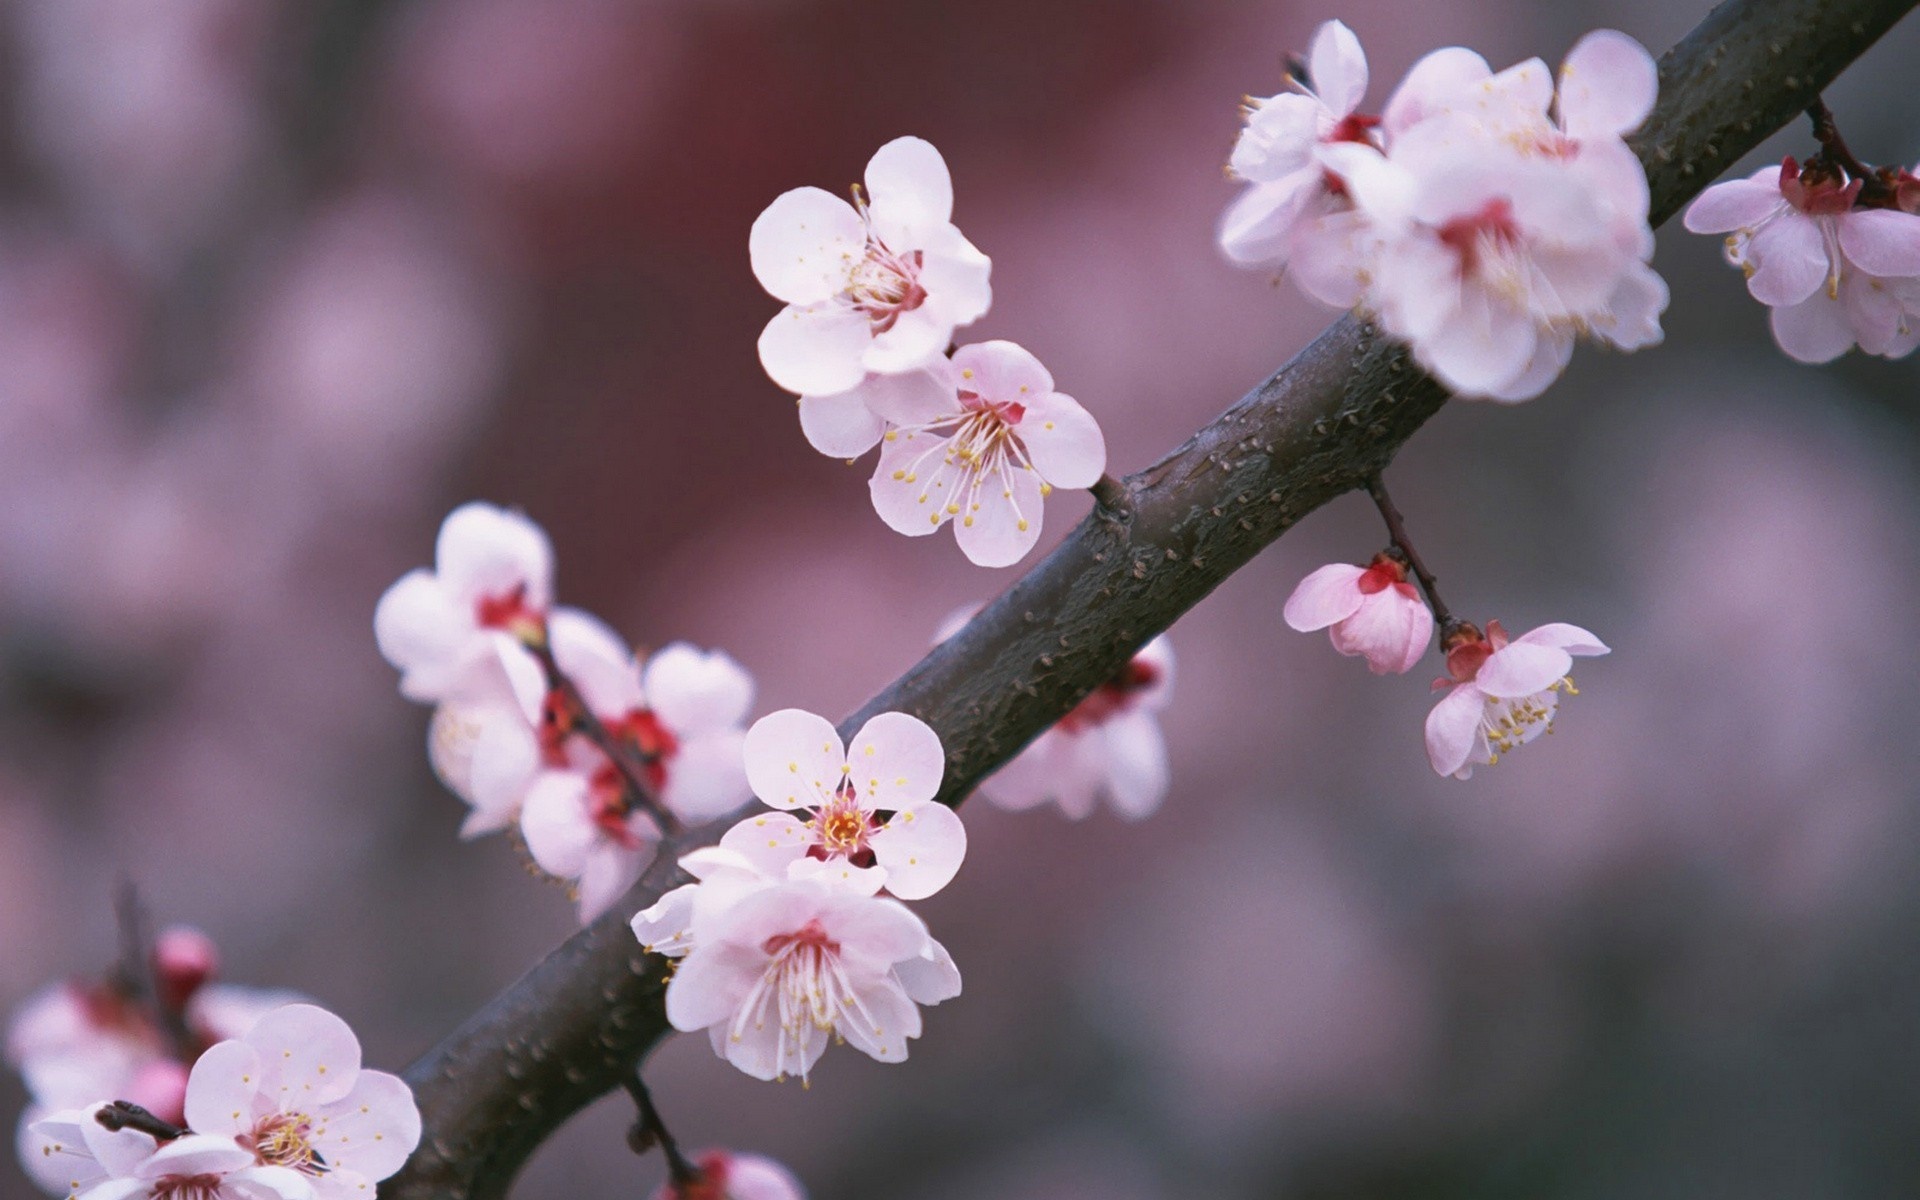 A tree branch cherry flowers blooming wallpaper | flowers ...